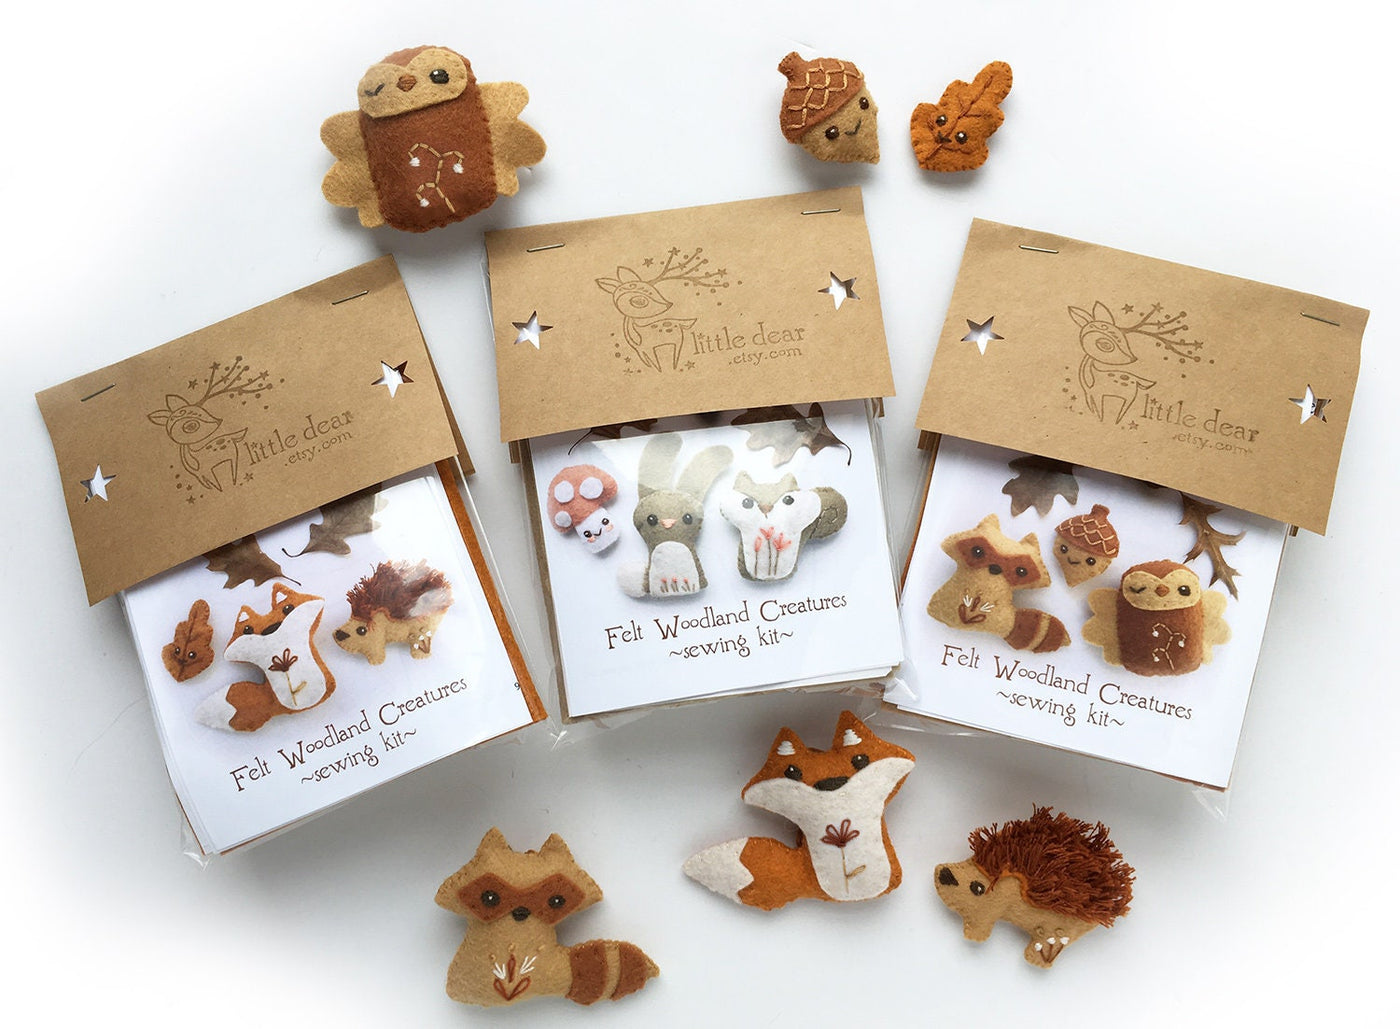 Sew Your Own Woodland Creatures with this Mini Felt Animals Sewing Kit –  Little Dear Shop